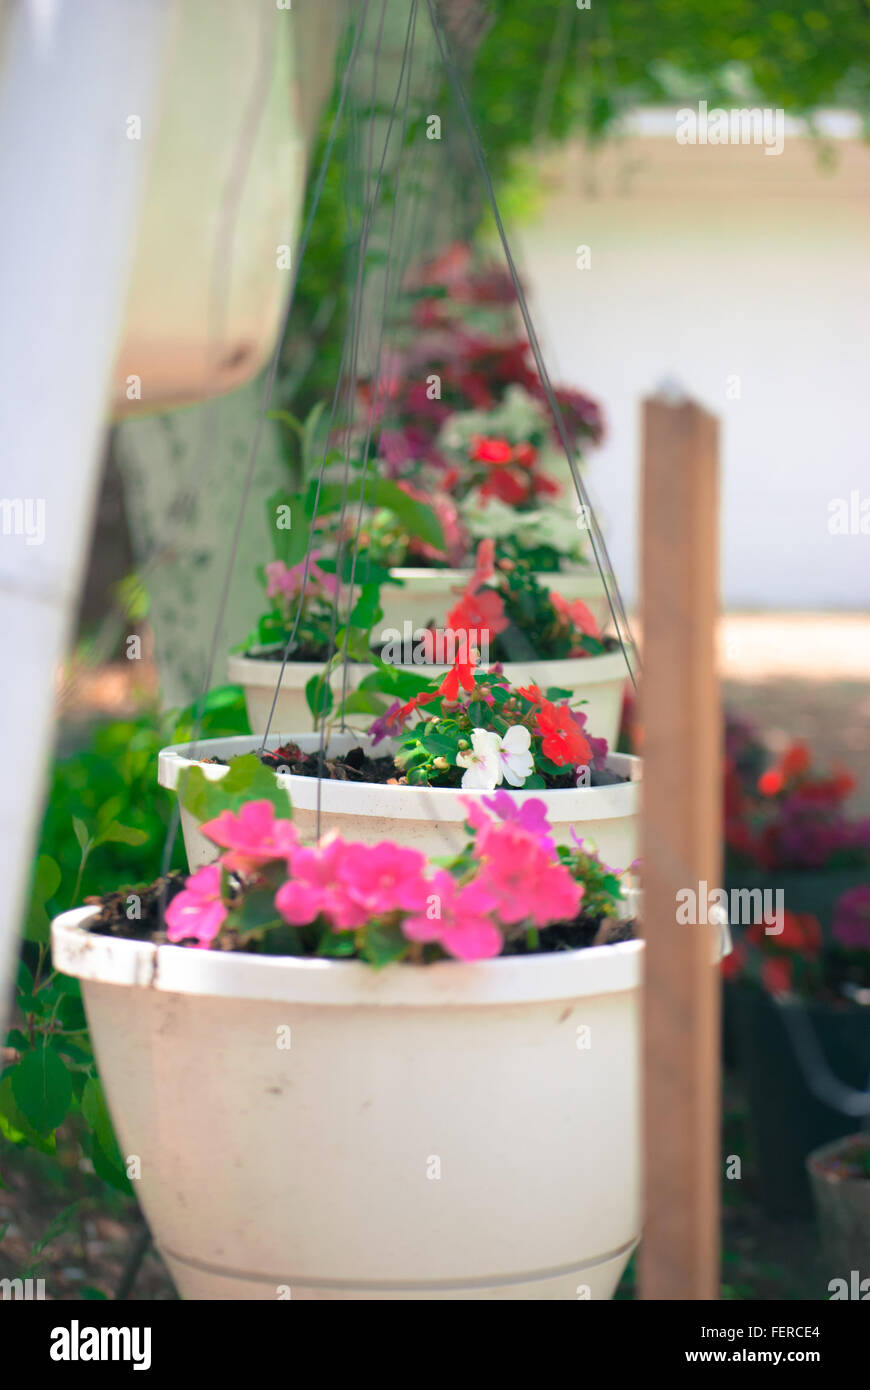 Flower Pots Hanging Outdoors Stock Photo